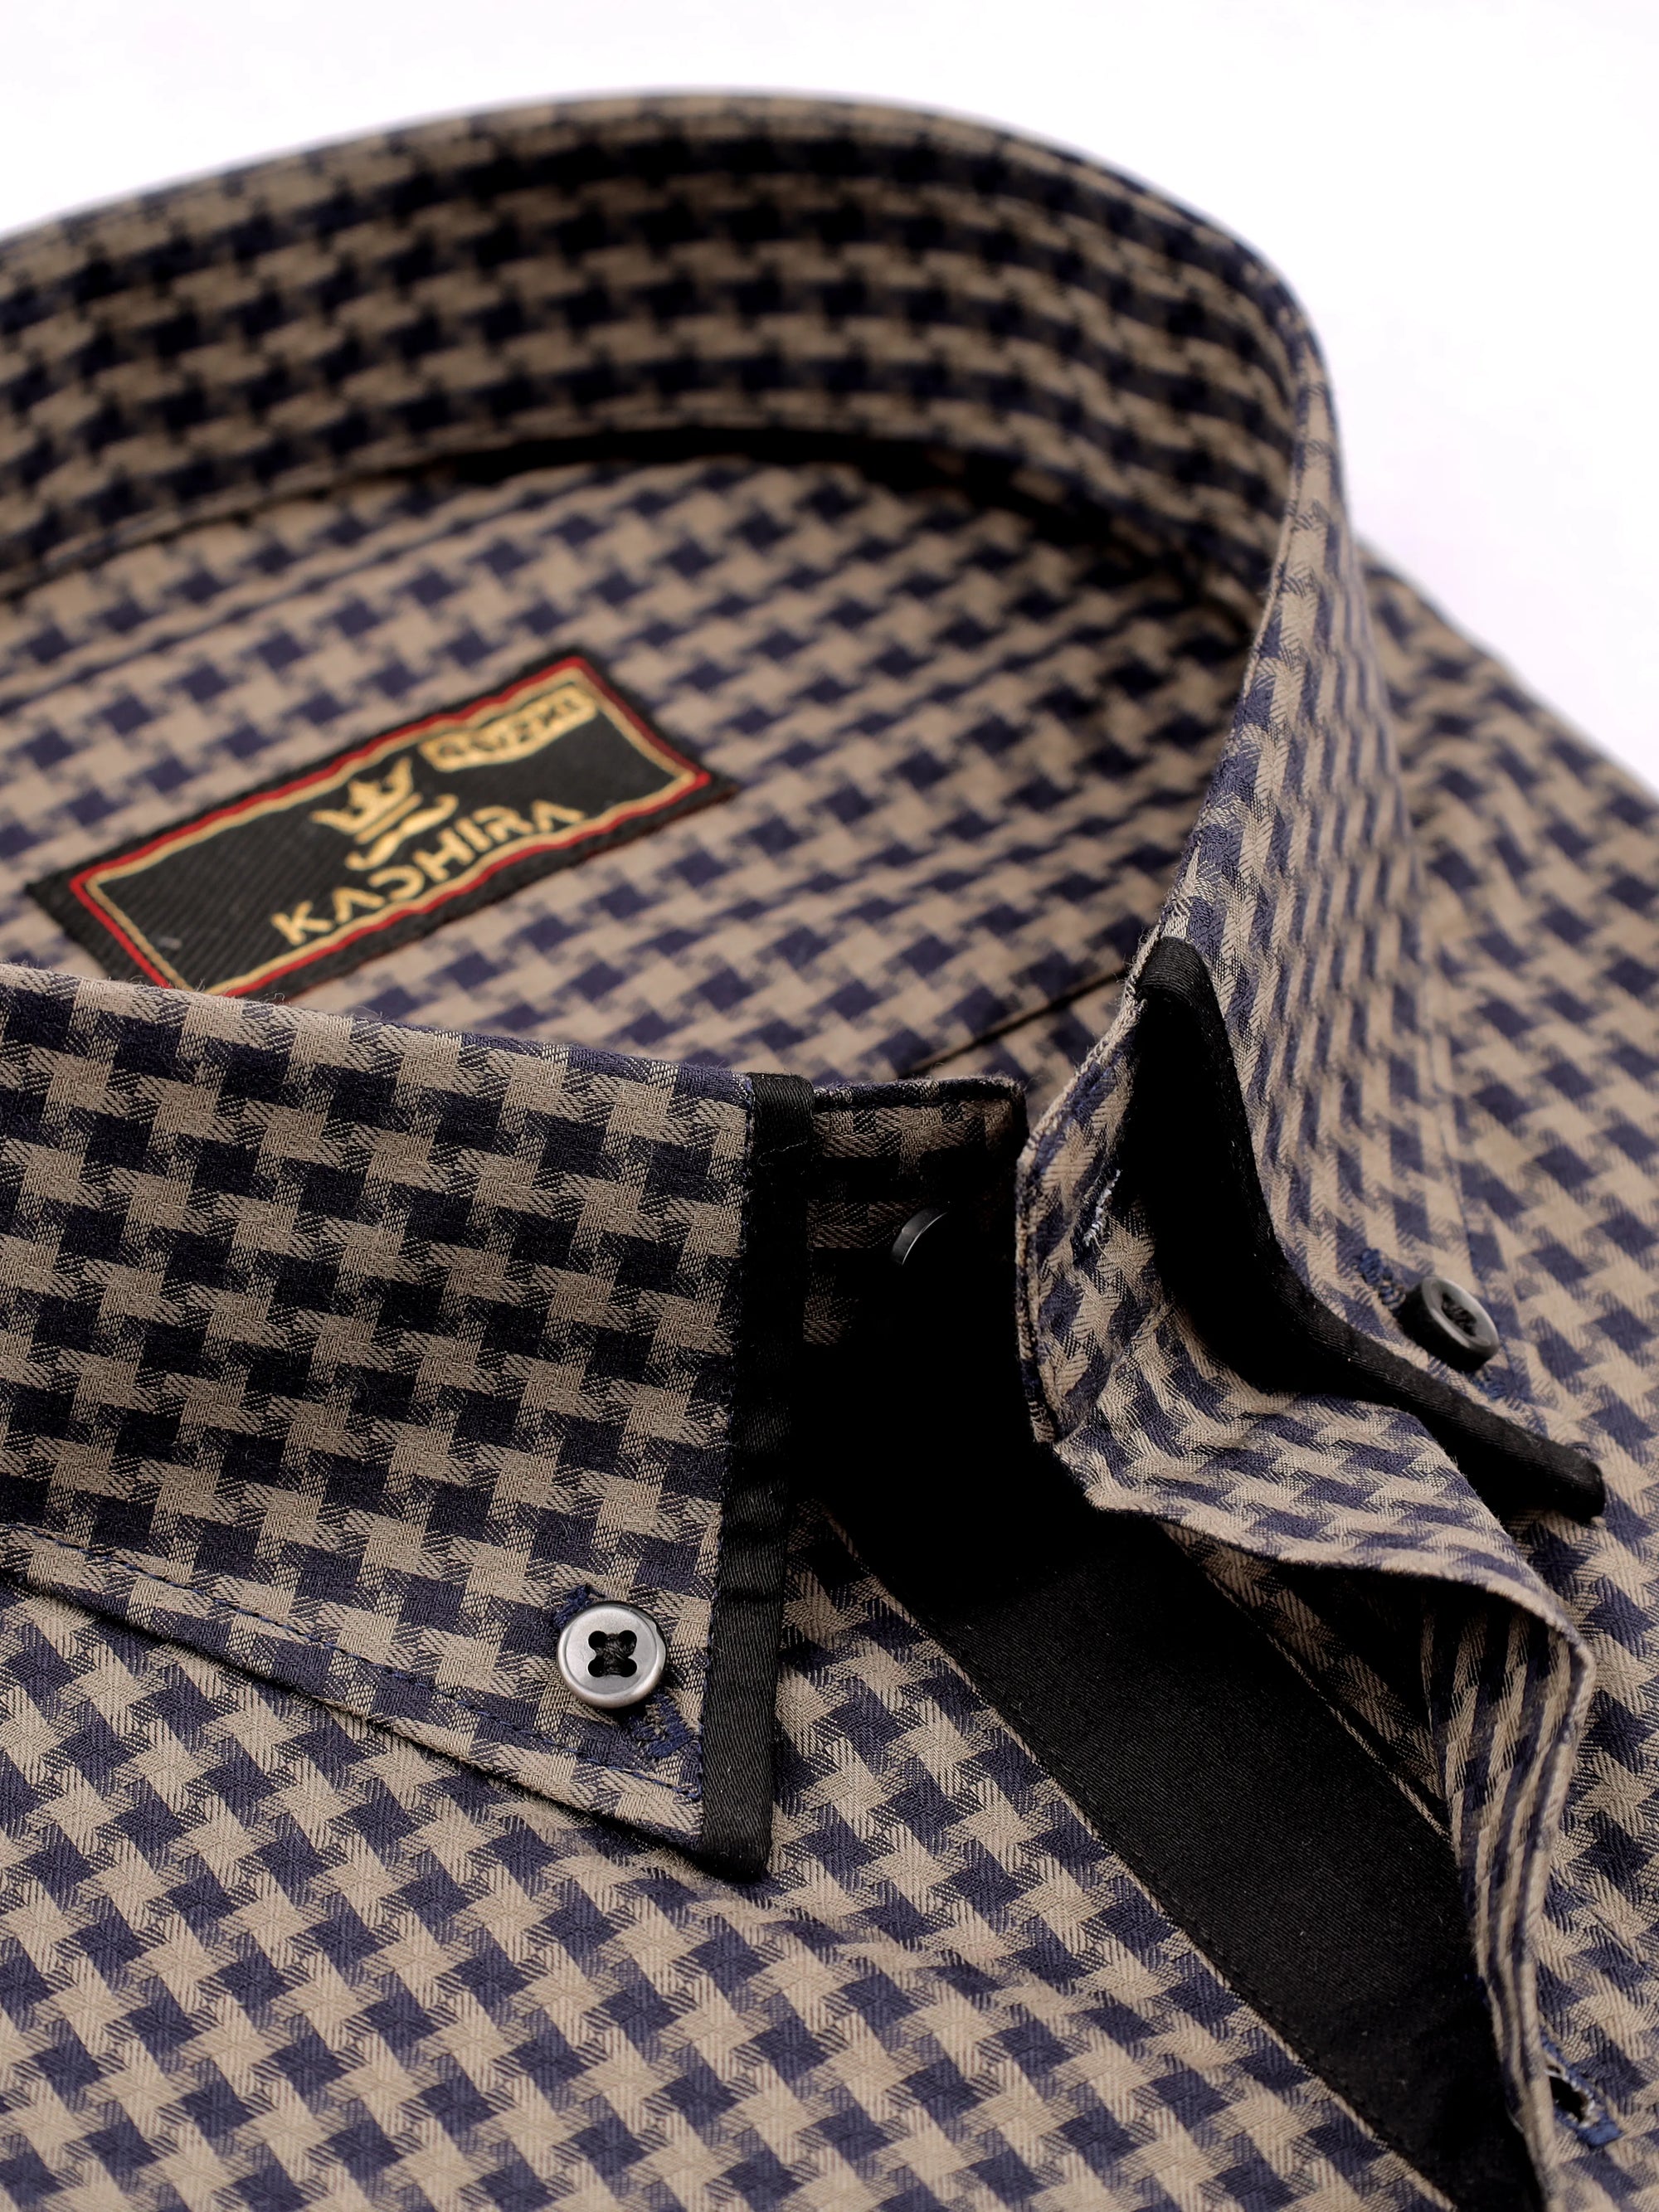 Navy Blue With Gray Dobby Textured Jacquard Cotton Shirt